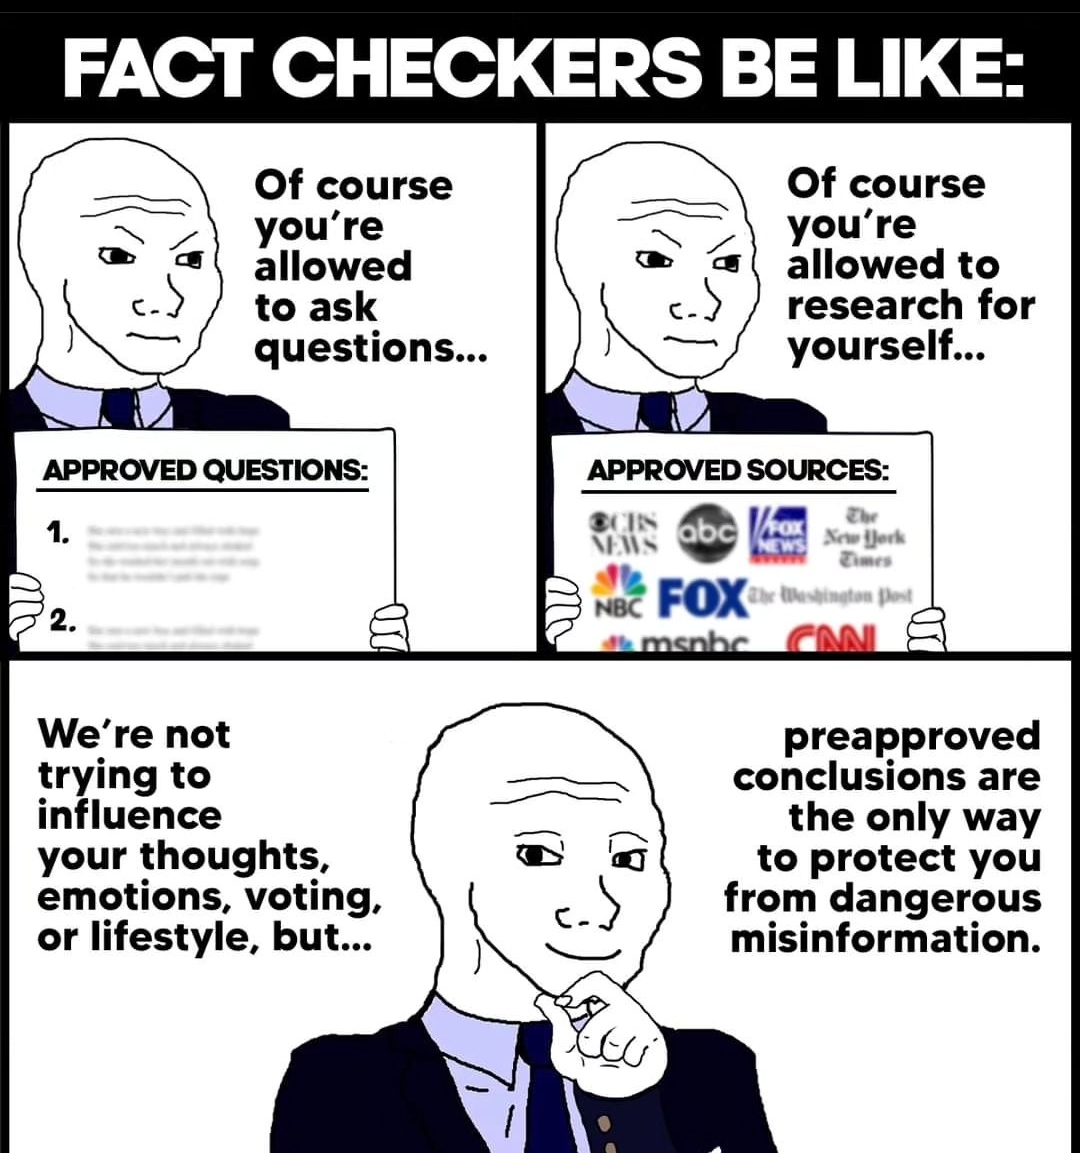 facts-checkers-didnt-exist-until-truth-started-coming-out-v0-5r8mu52xlhza1.jpg